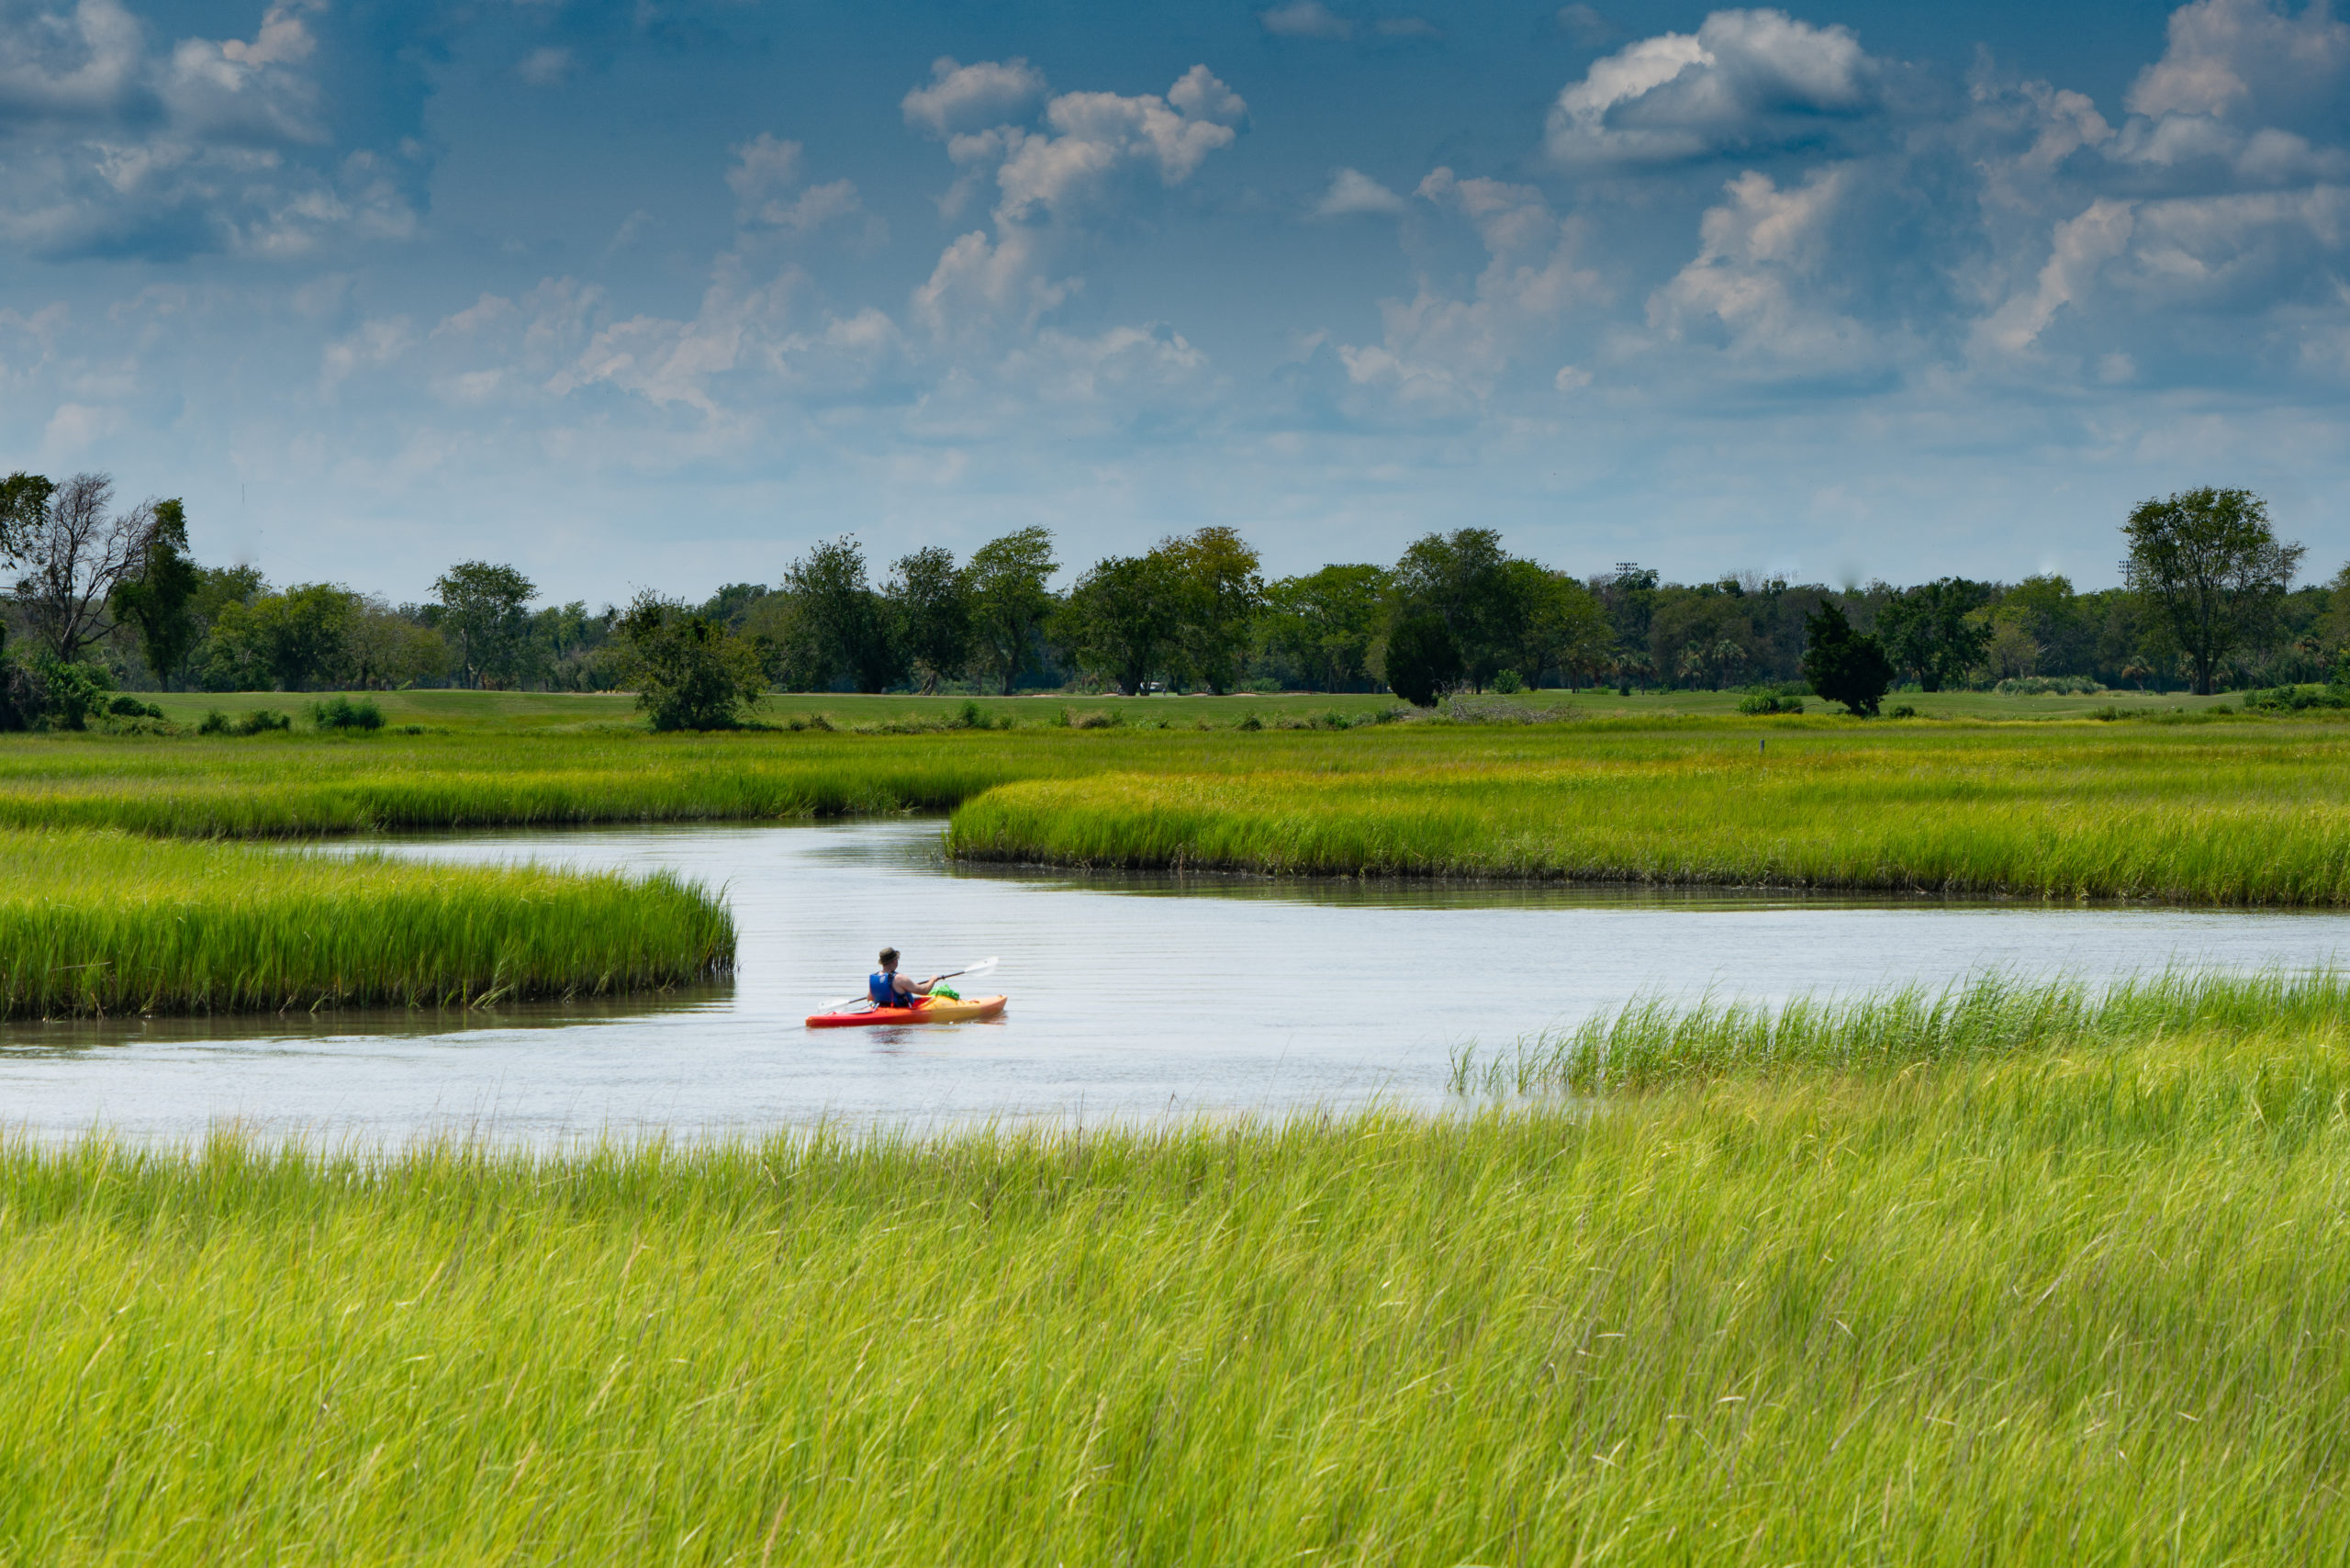 Take a kayak through the tidal creeks of the May River